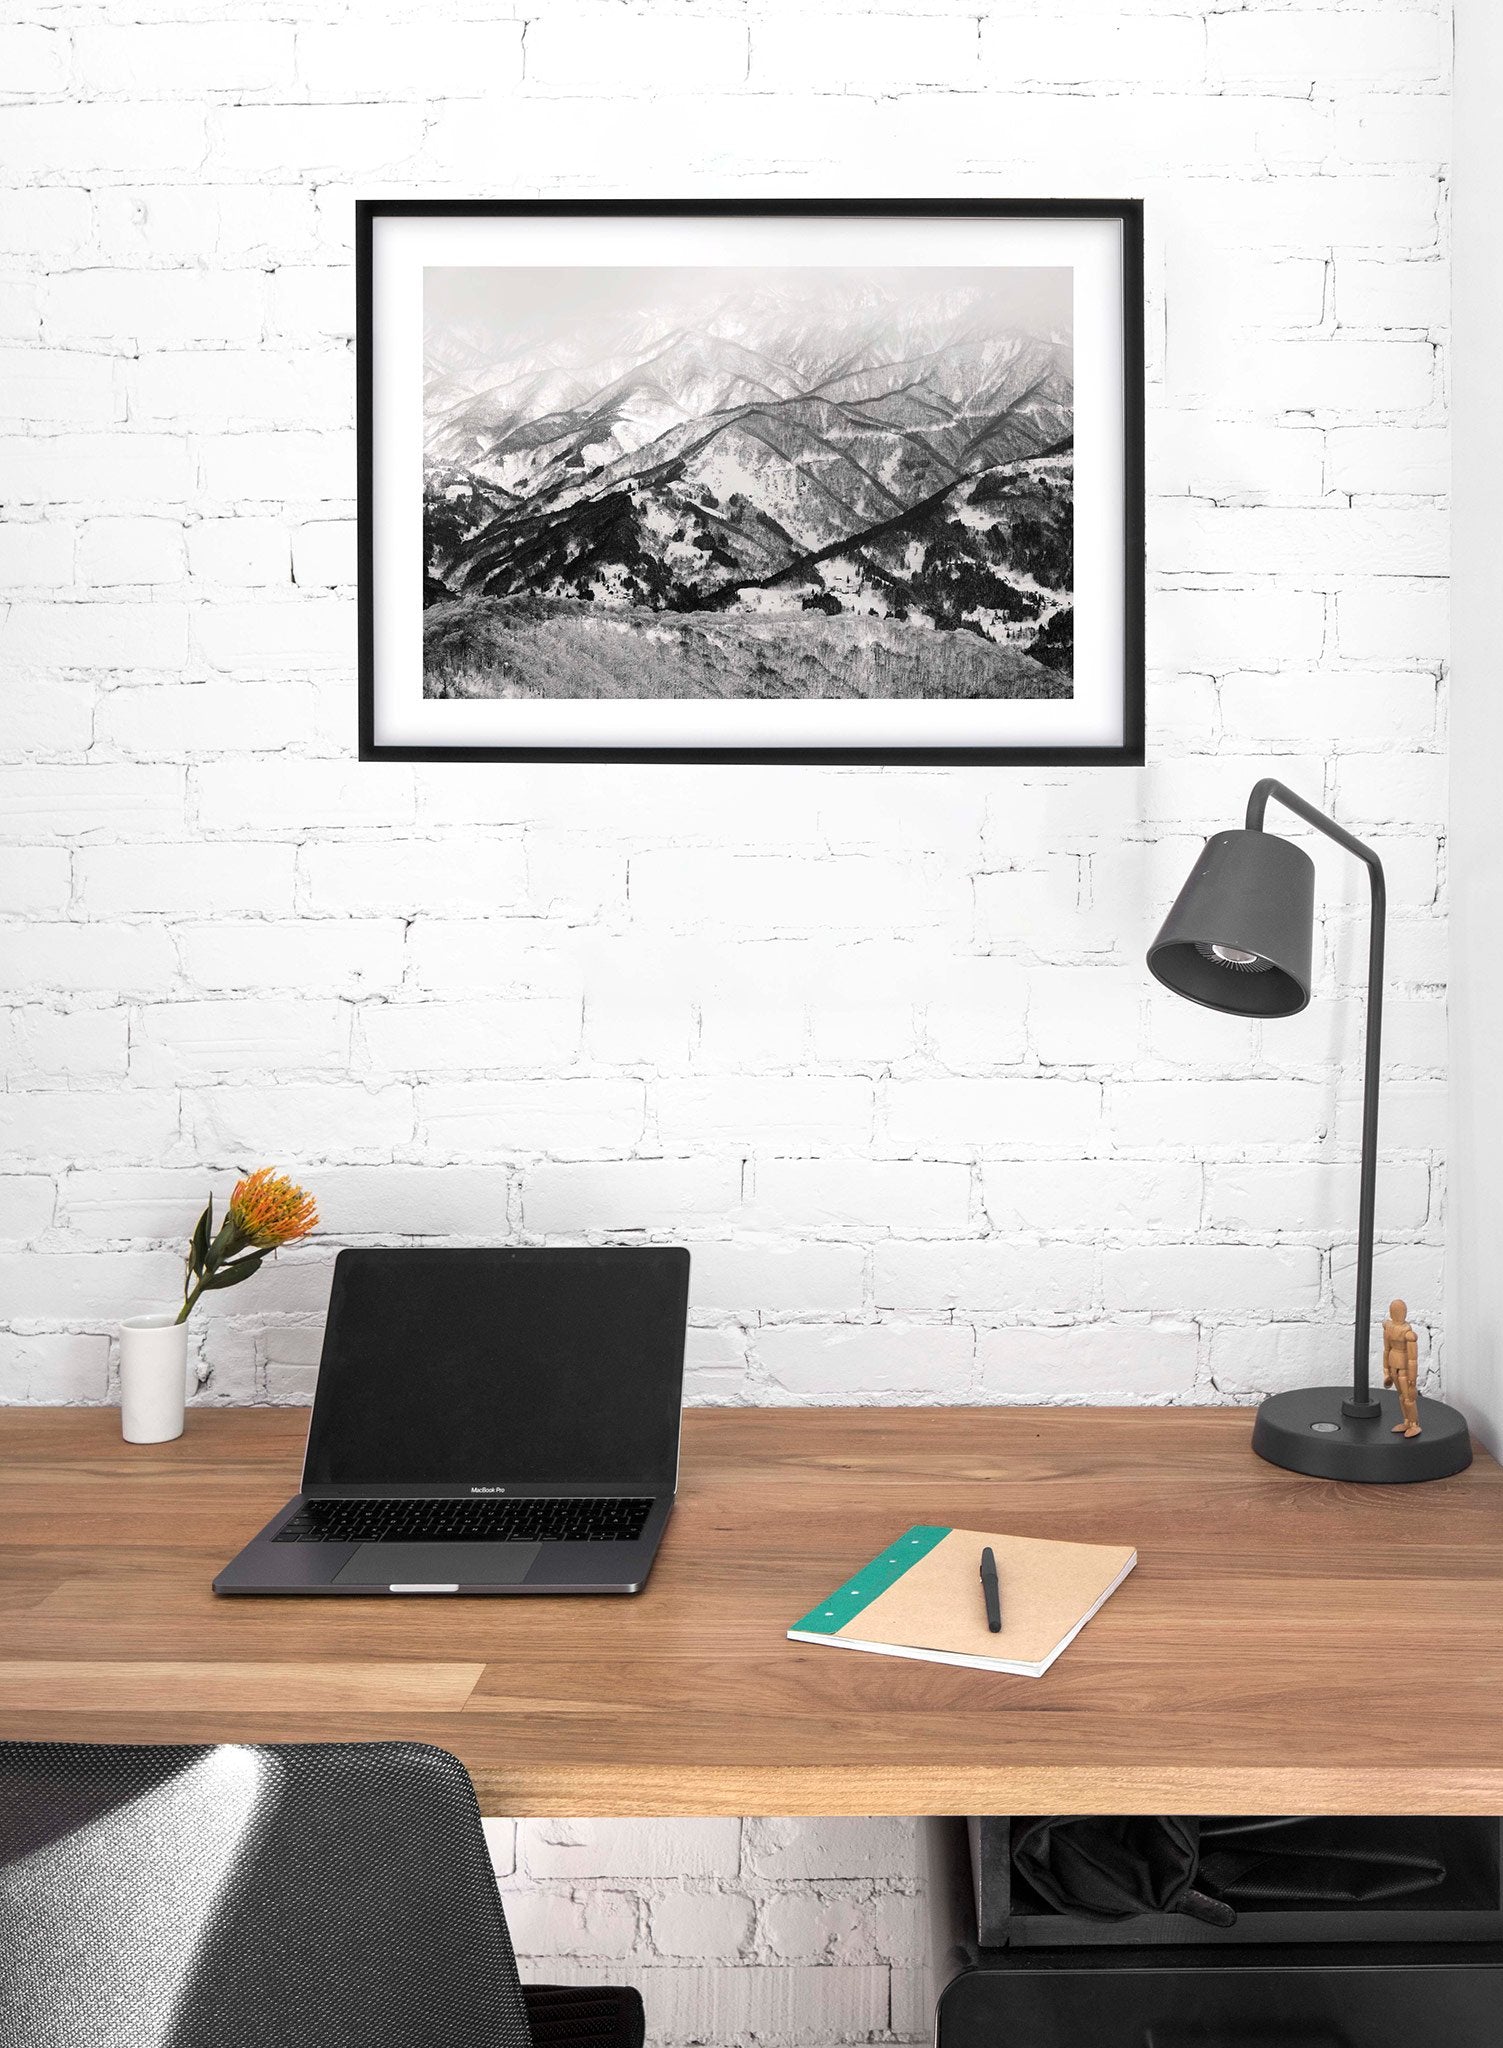 Landscape photography poster by Opposite Wall with dusting of snow on mountain - Lifestyle - Office Desk